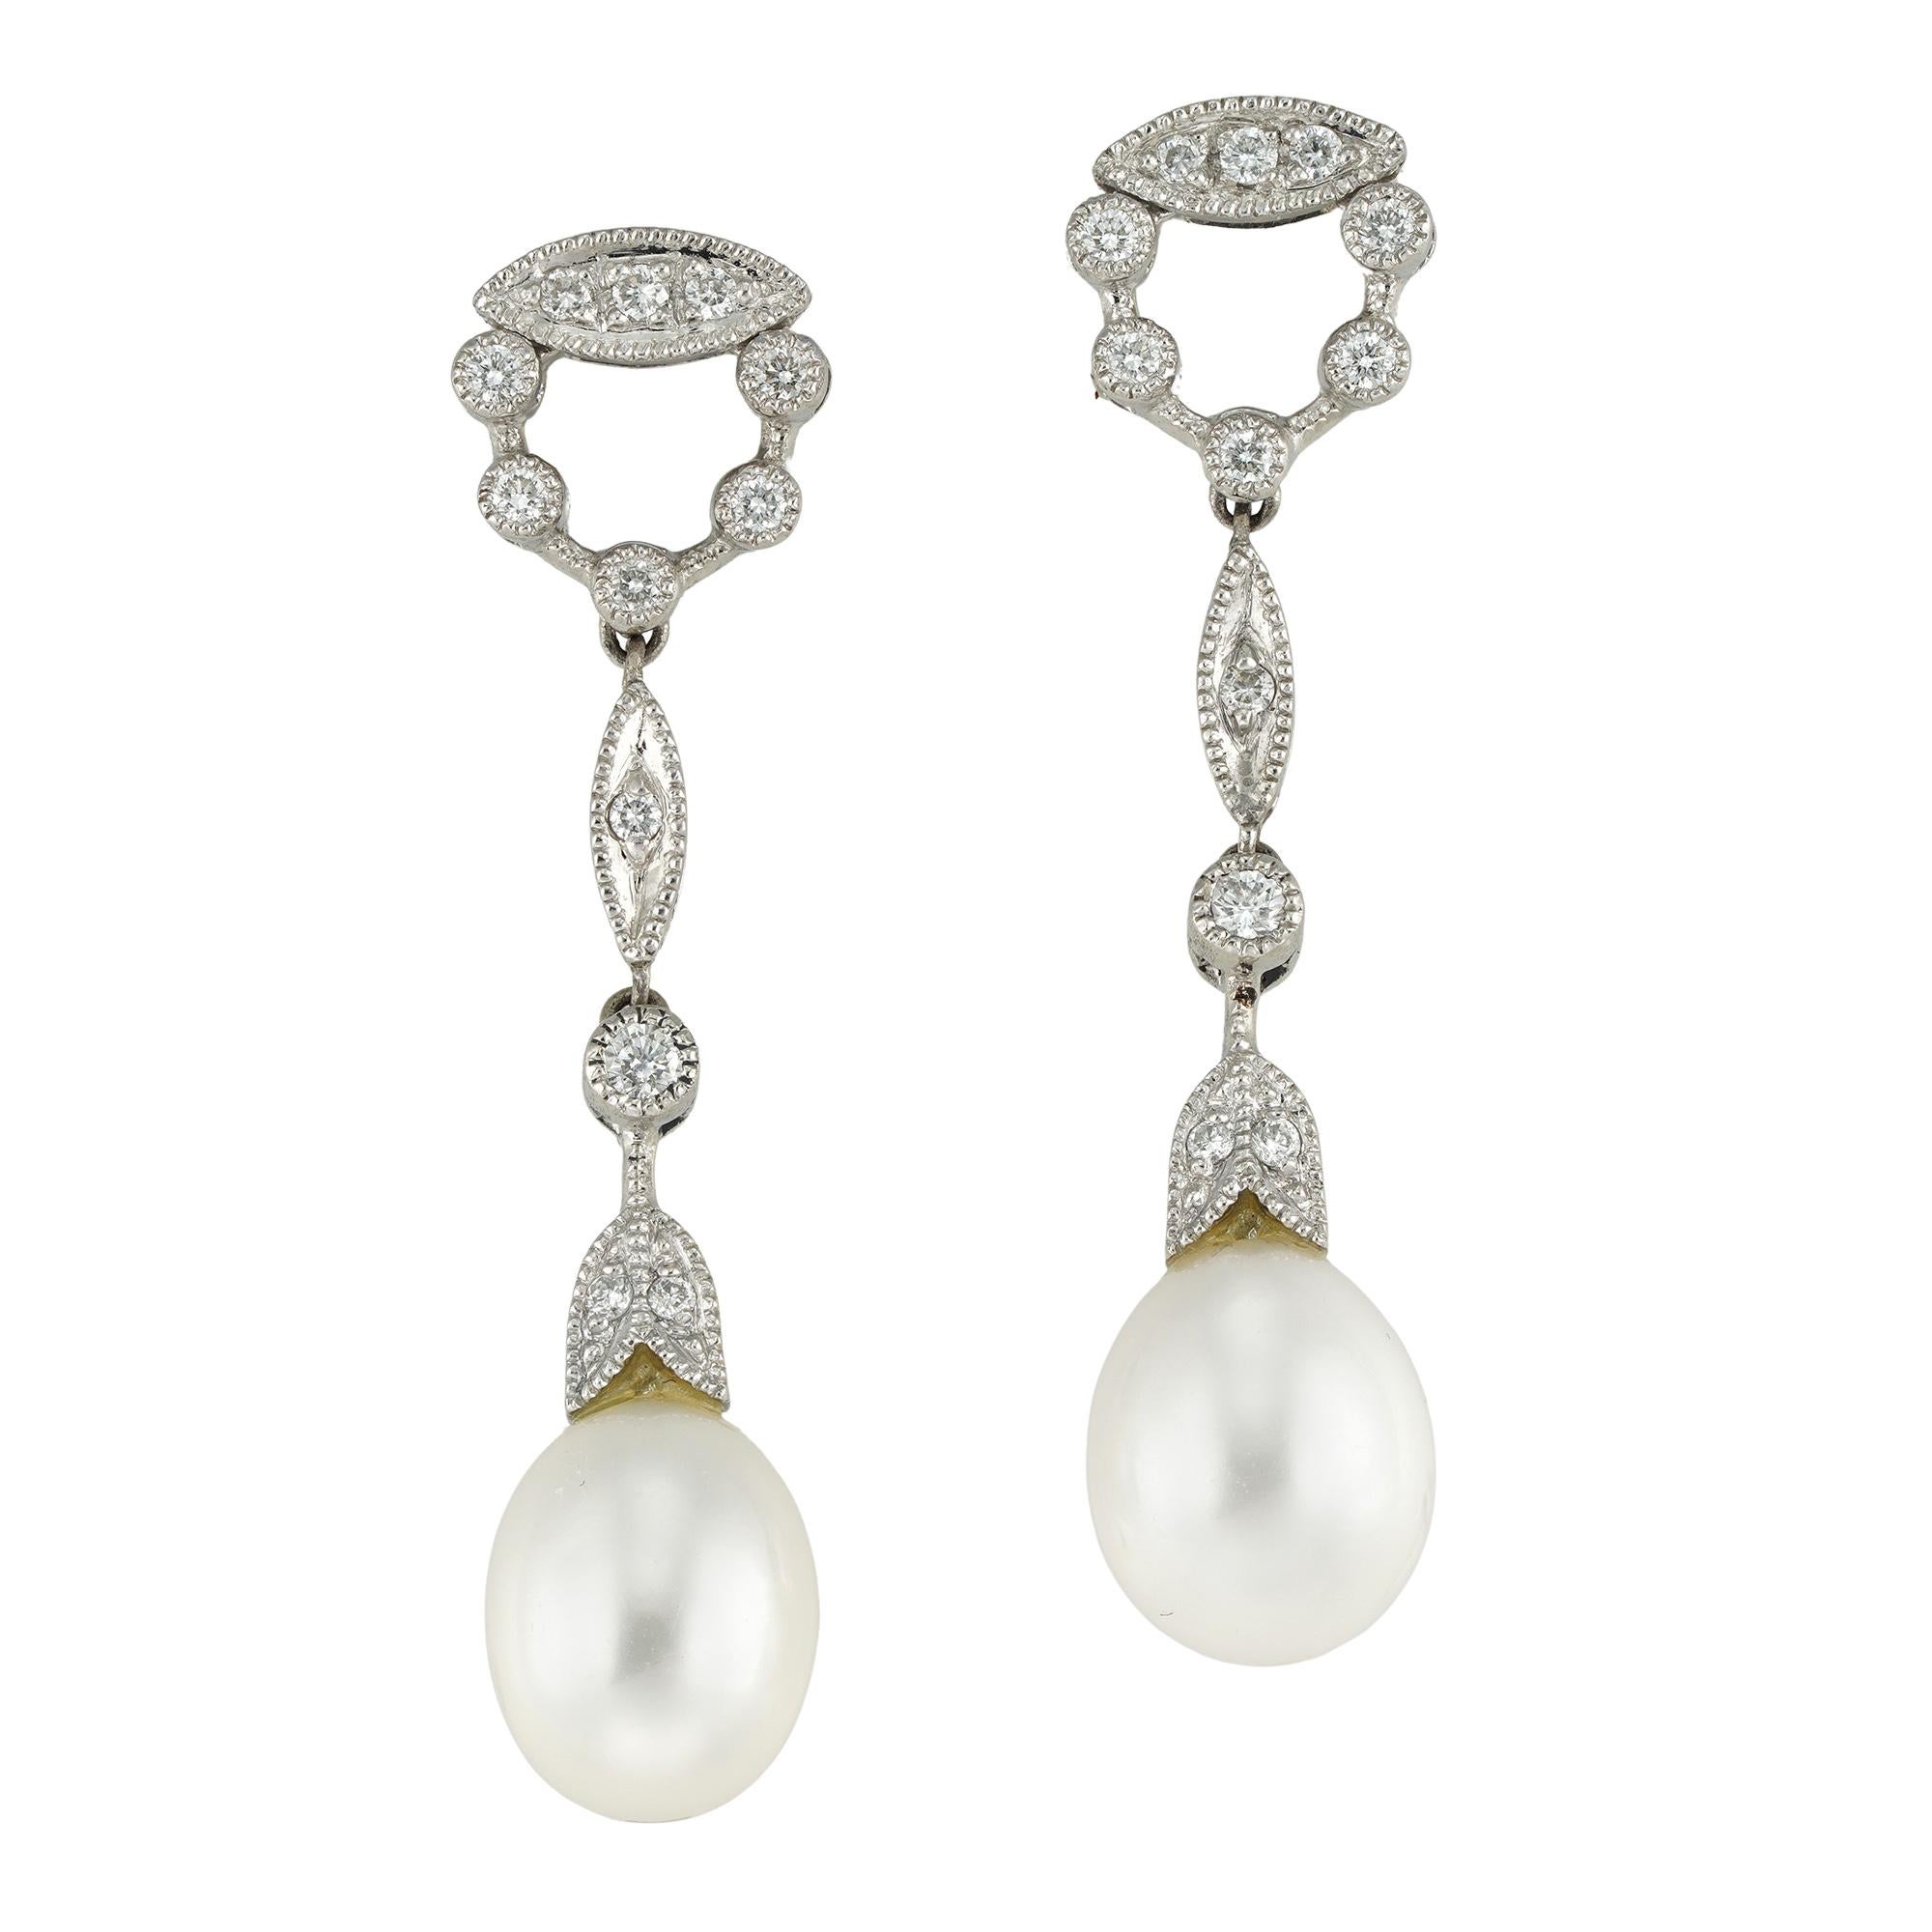 A pair of cultured pearl and diamond drop earrings, each earring consisting of a freshwater cultured pearl drop measuring approximately 9.5 x 7mm, attached to diamond-set foliate cap, surmounted by round and marquise shape diamond-set line,